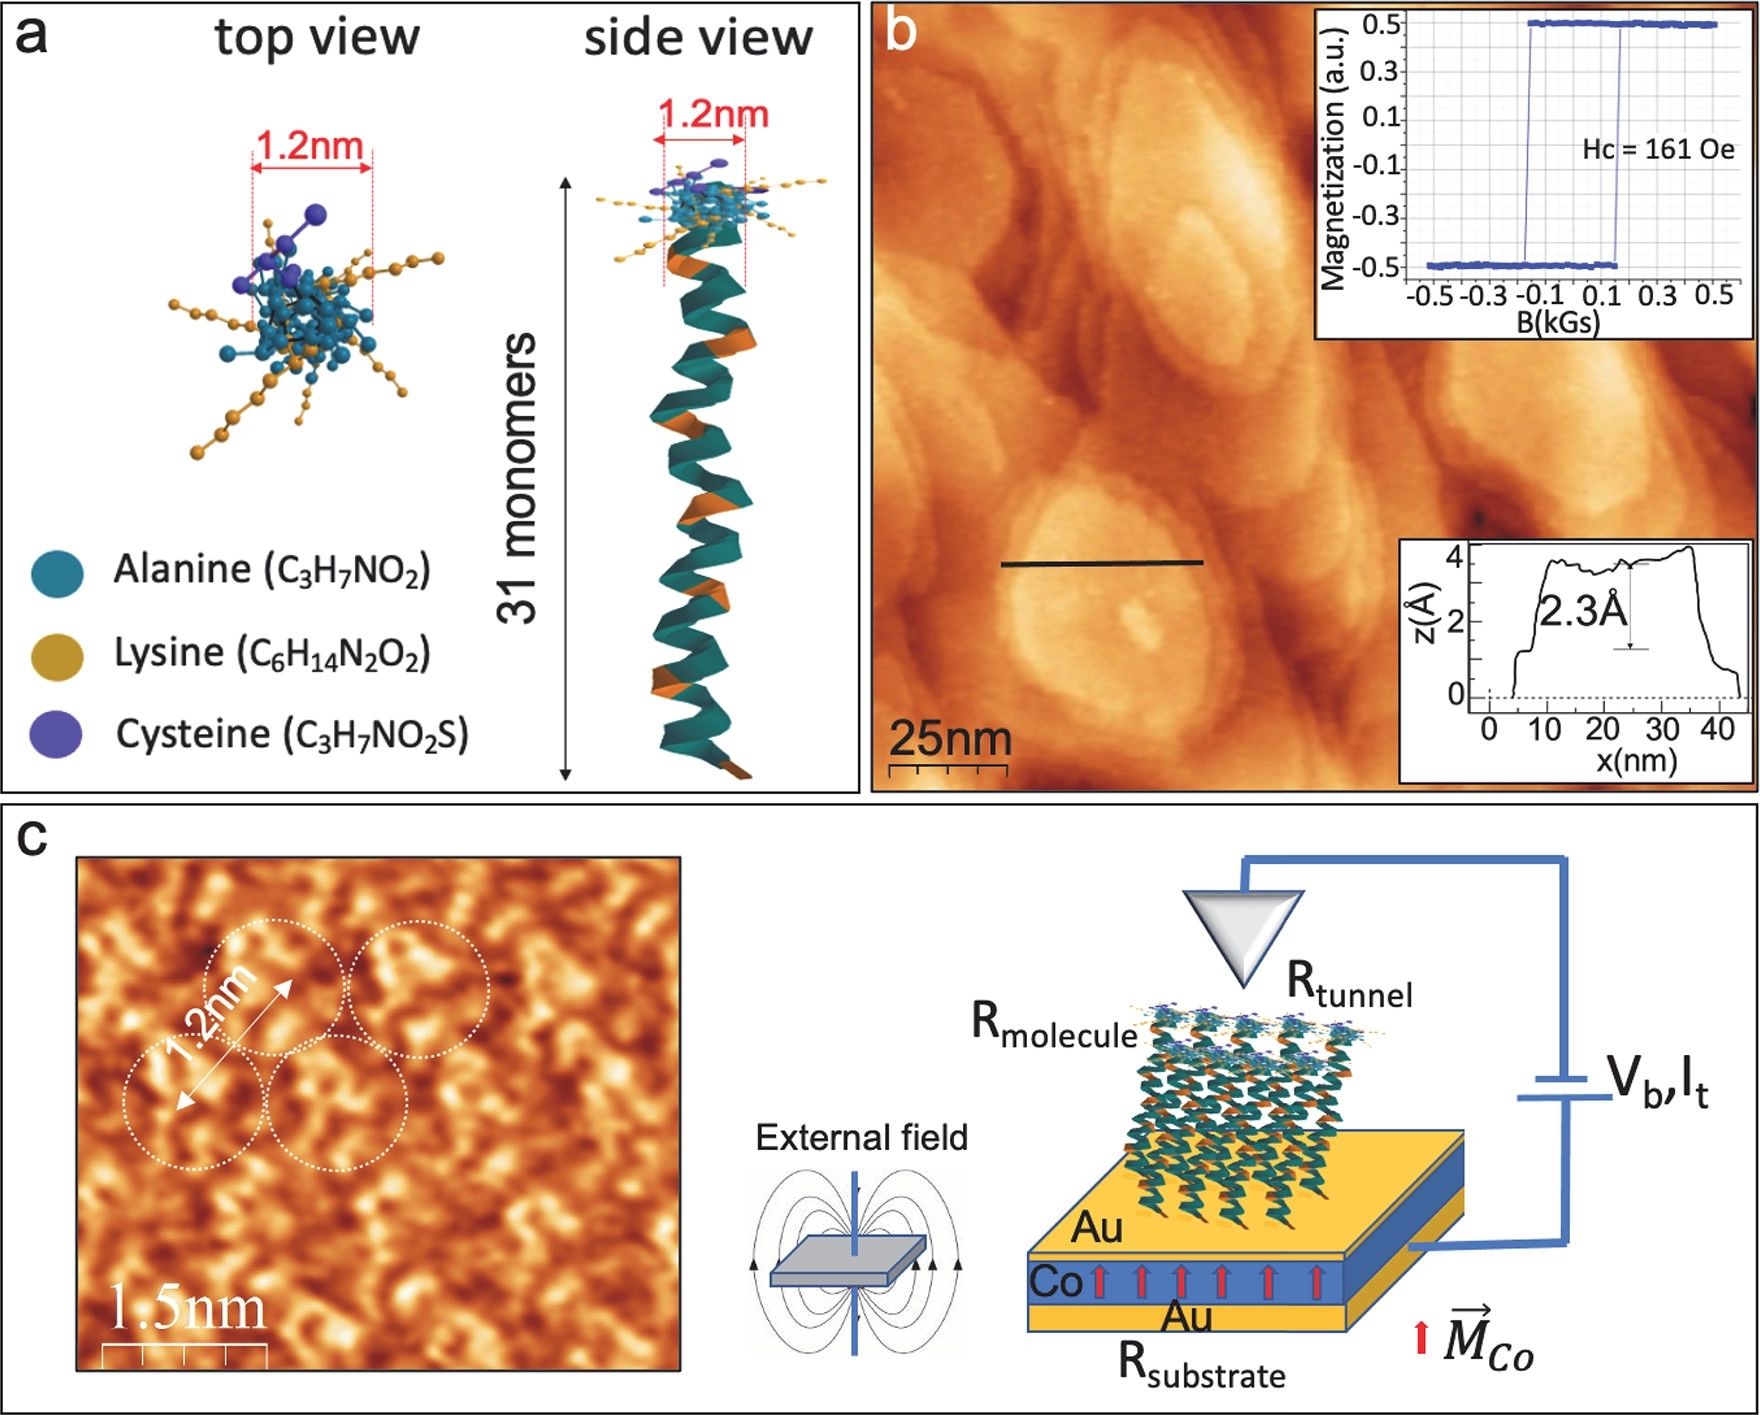 Cooperative Effect of Electron Spin Polarization in Chiral Molecules Studied with Non-Spin-Polarized Scanning Tunneling Microscopy